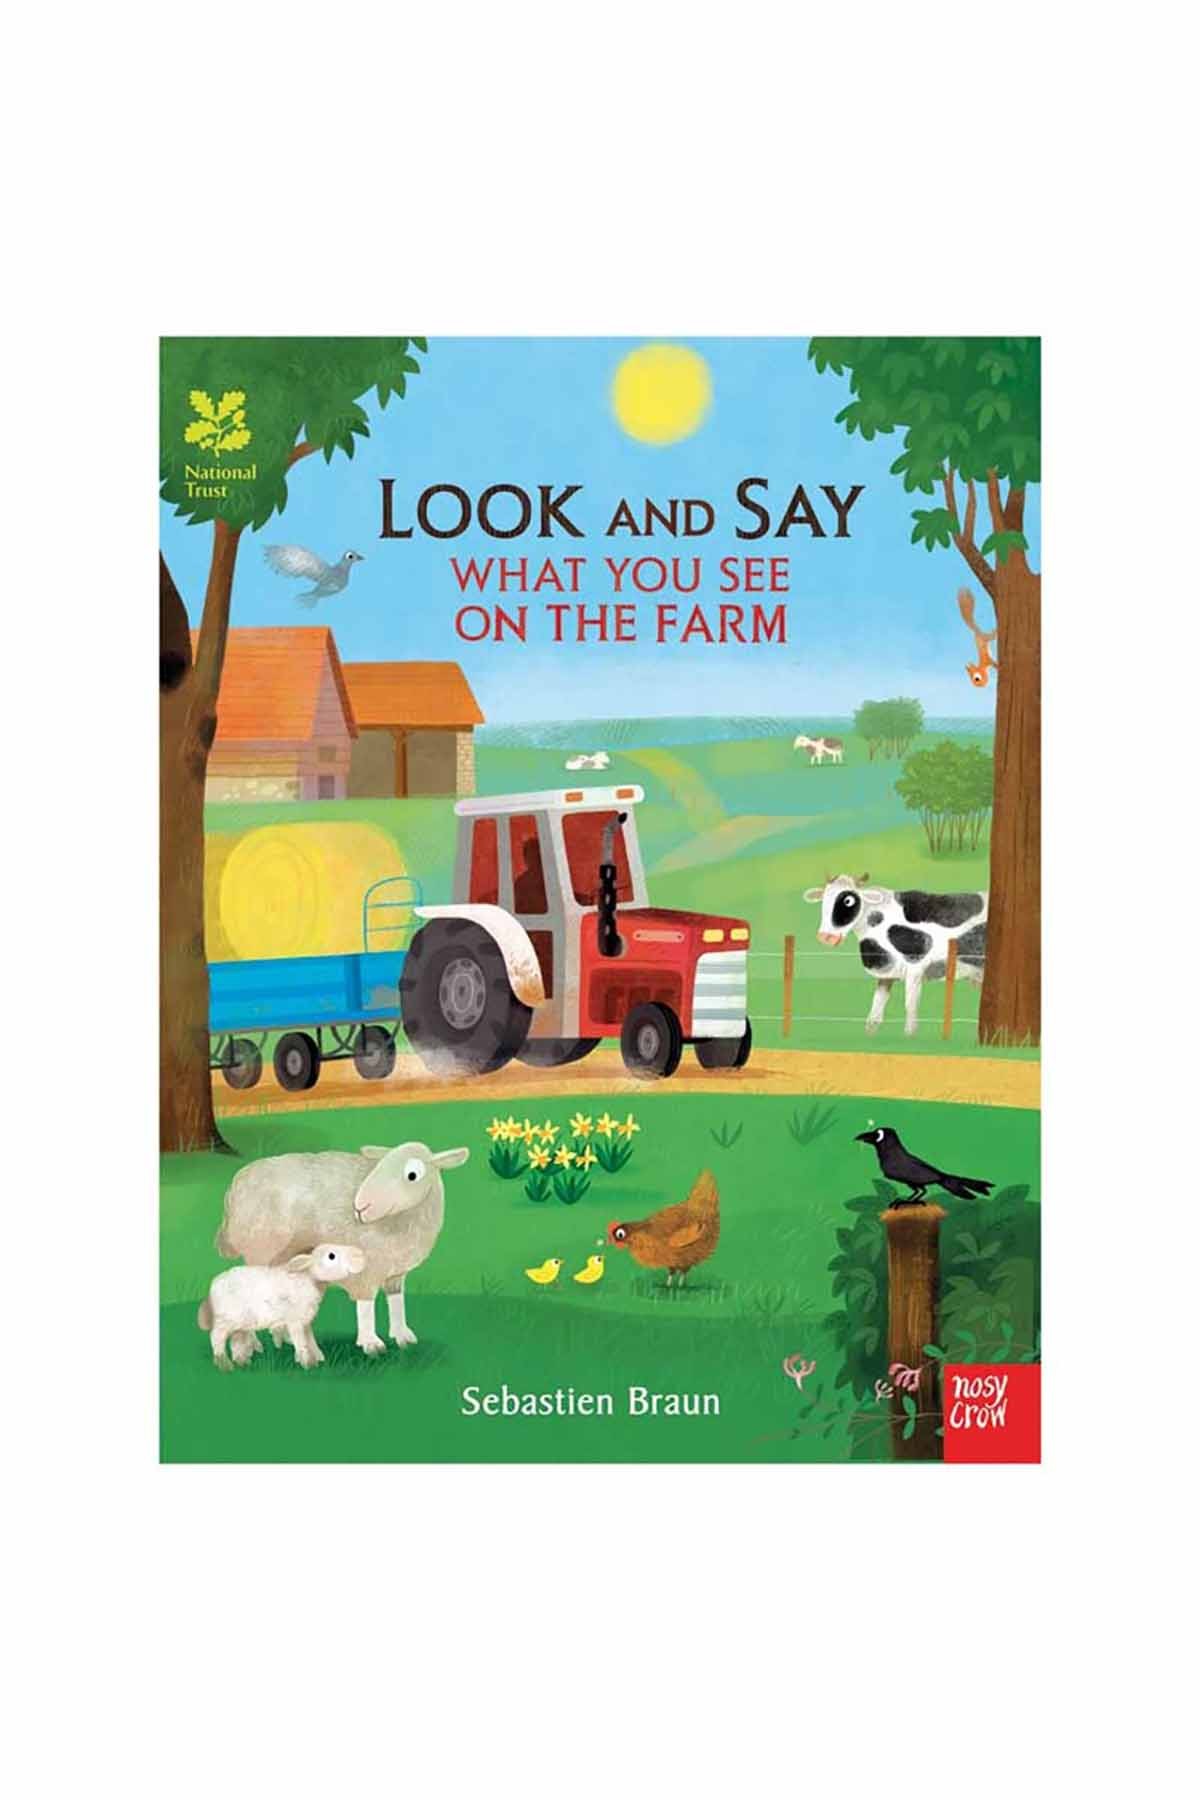 Look and Say Farm